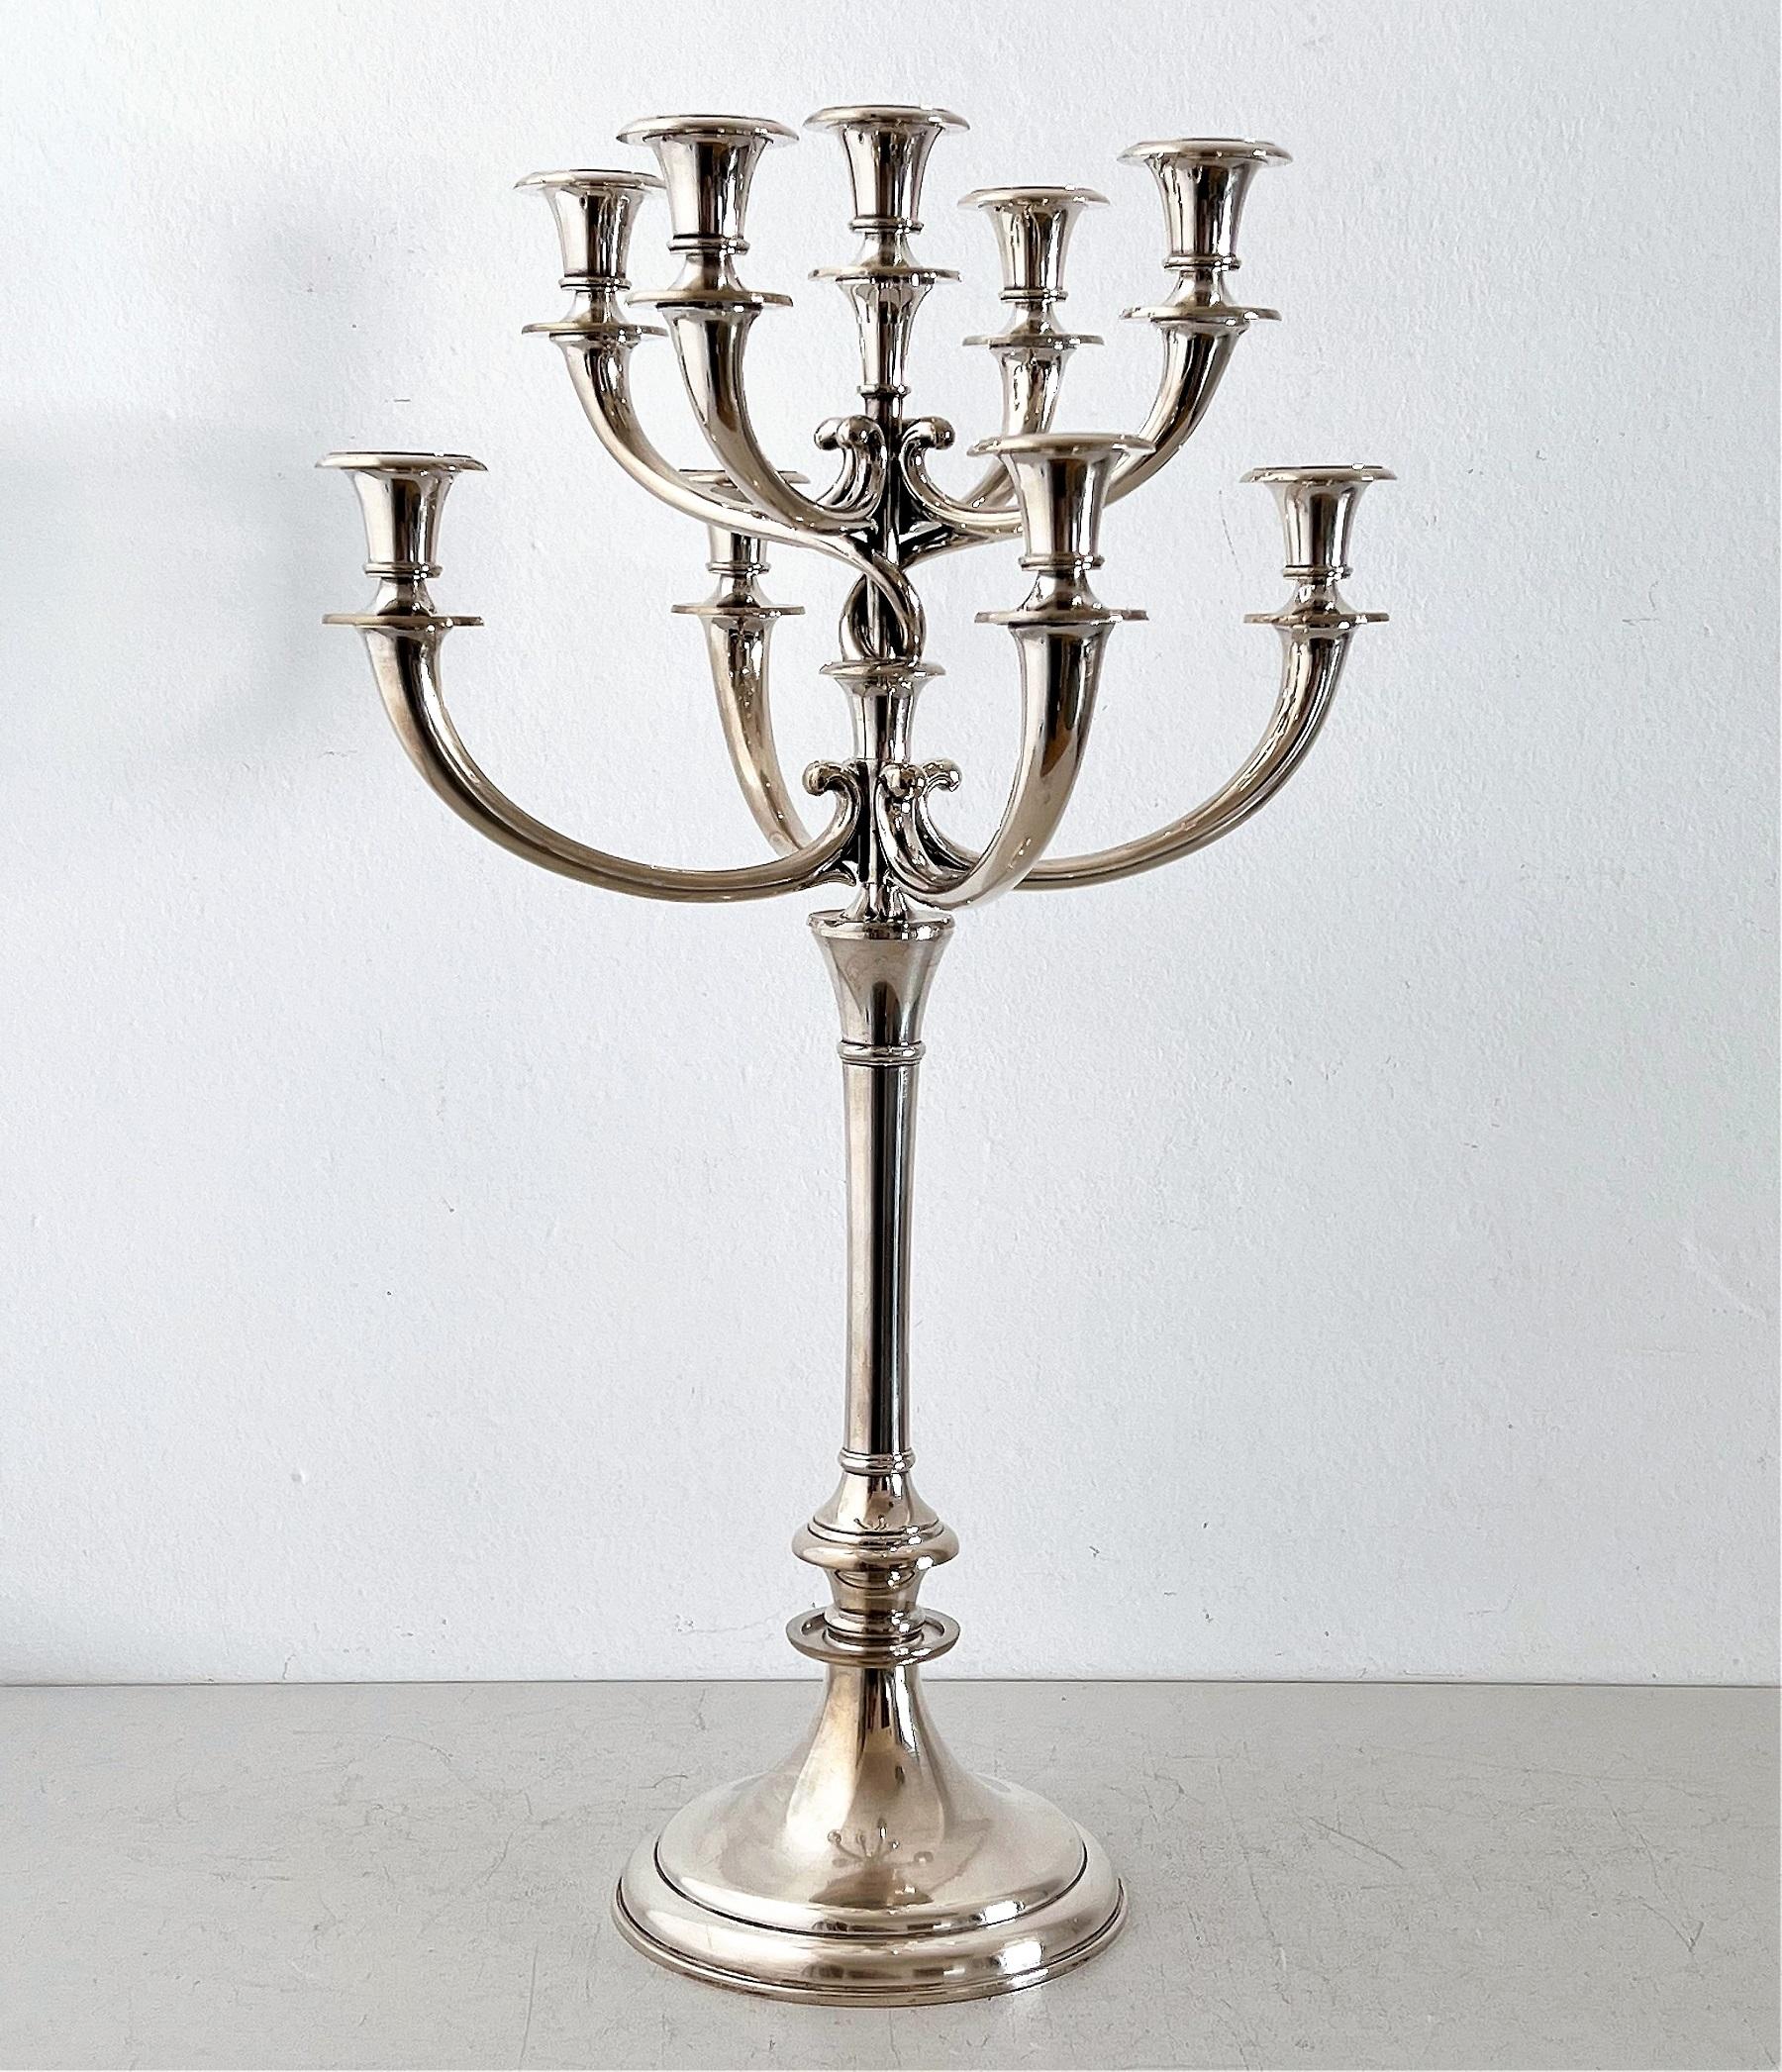 Midcentury Extra Large Hotel Candle Holder in Bronze Silverplated by WMF Germany For Sale 6